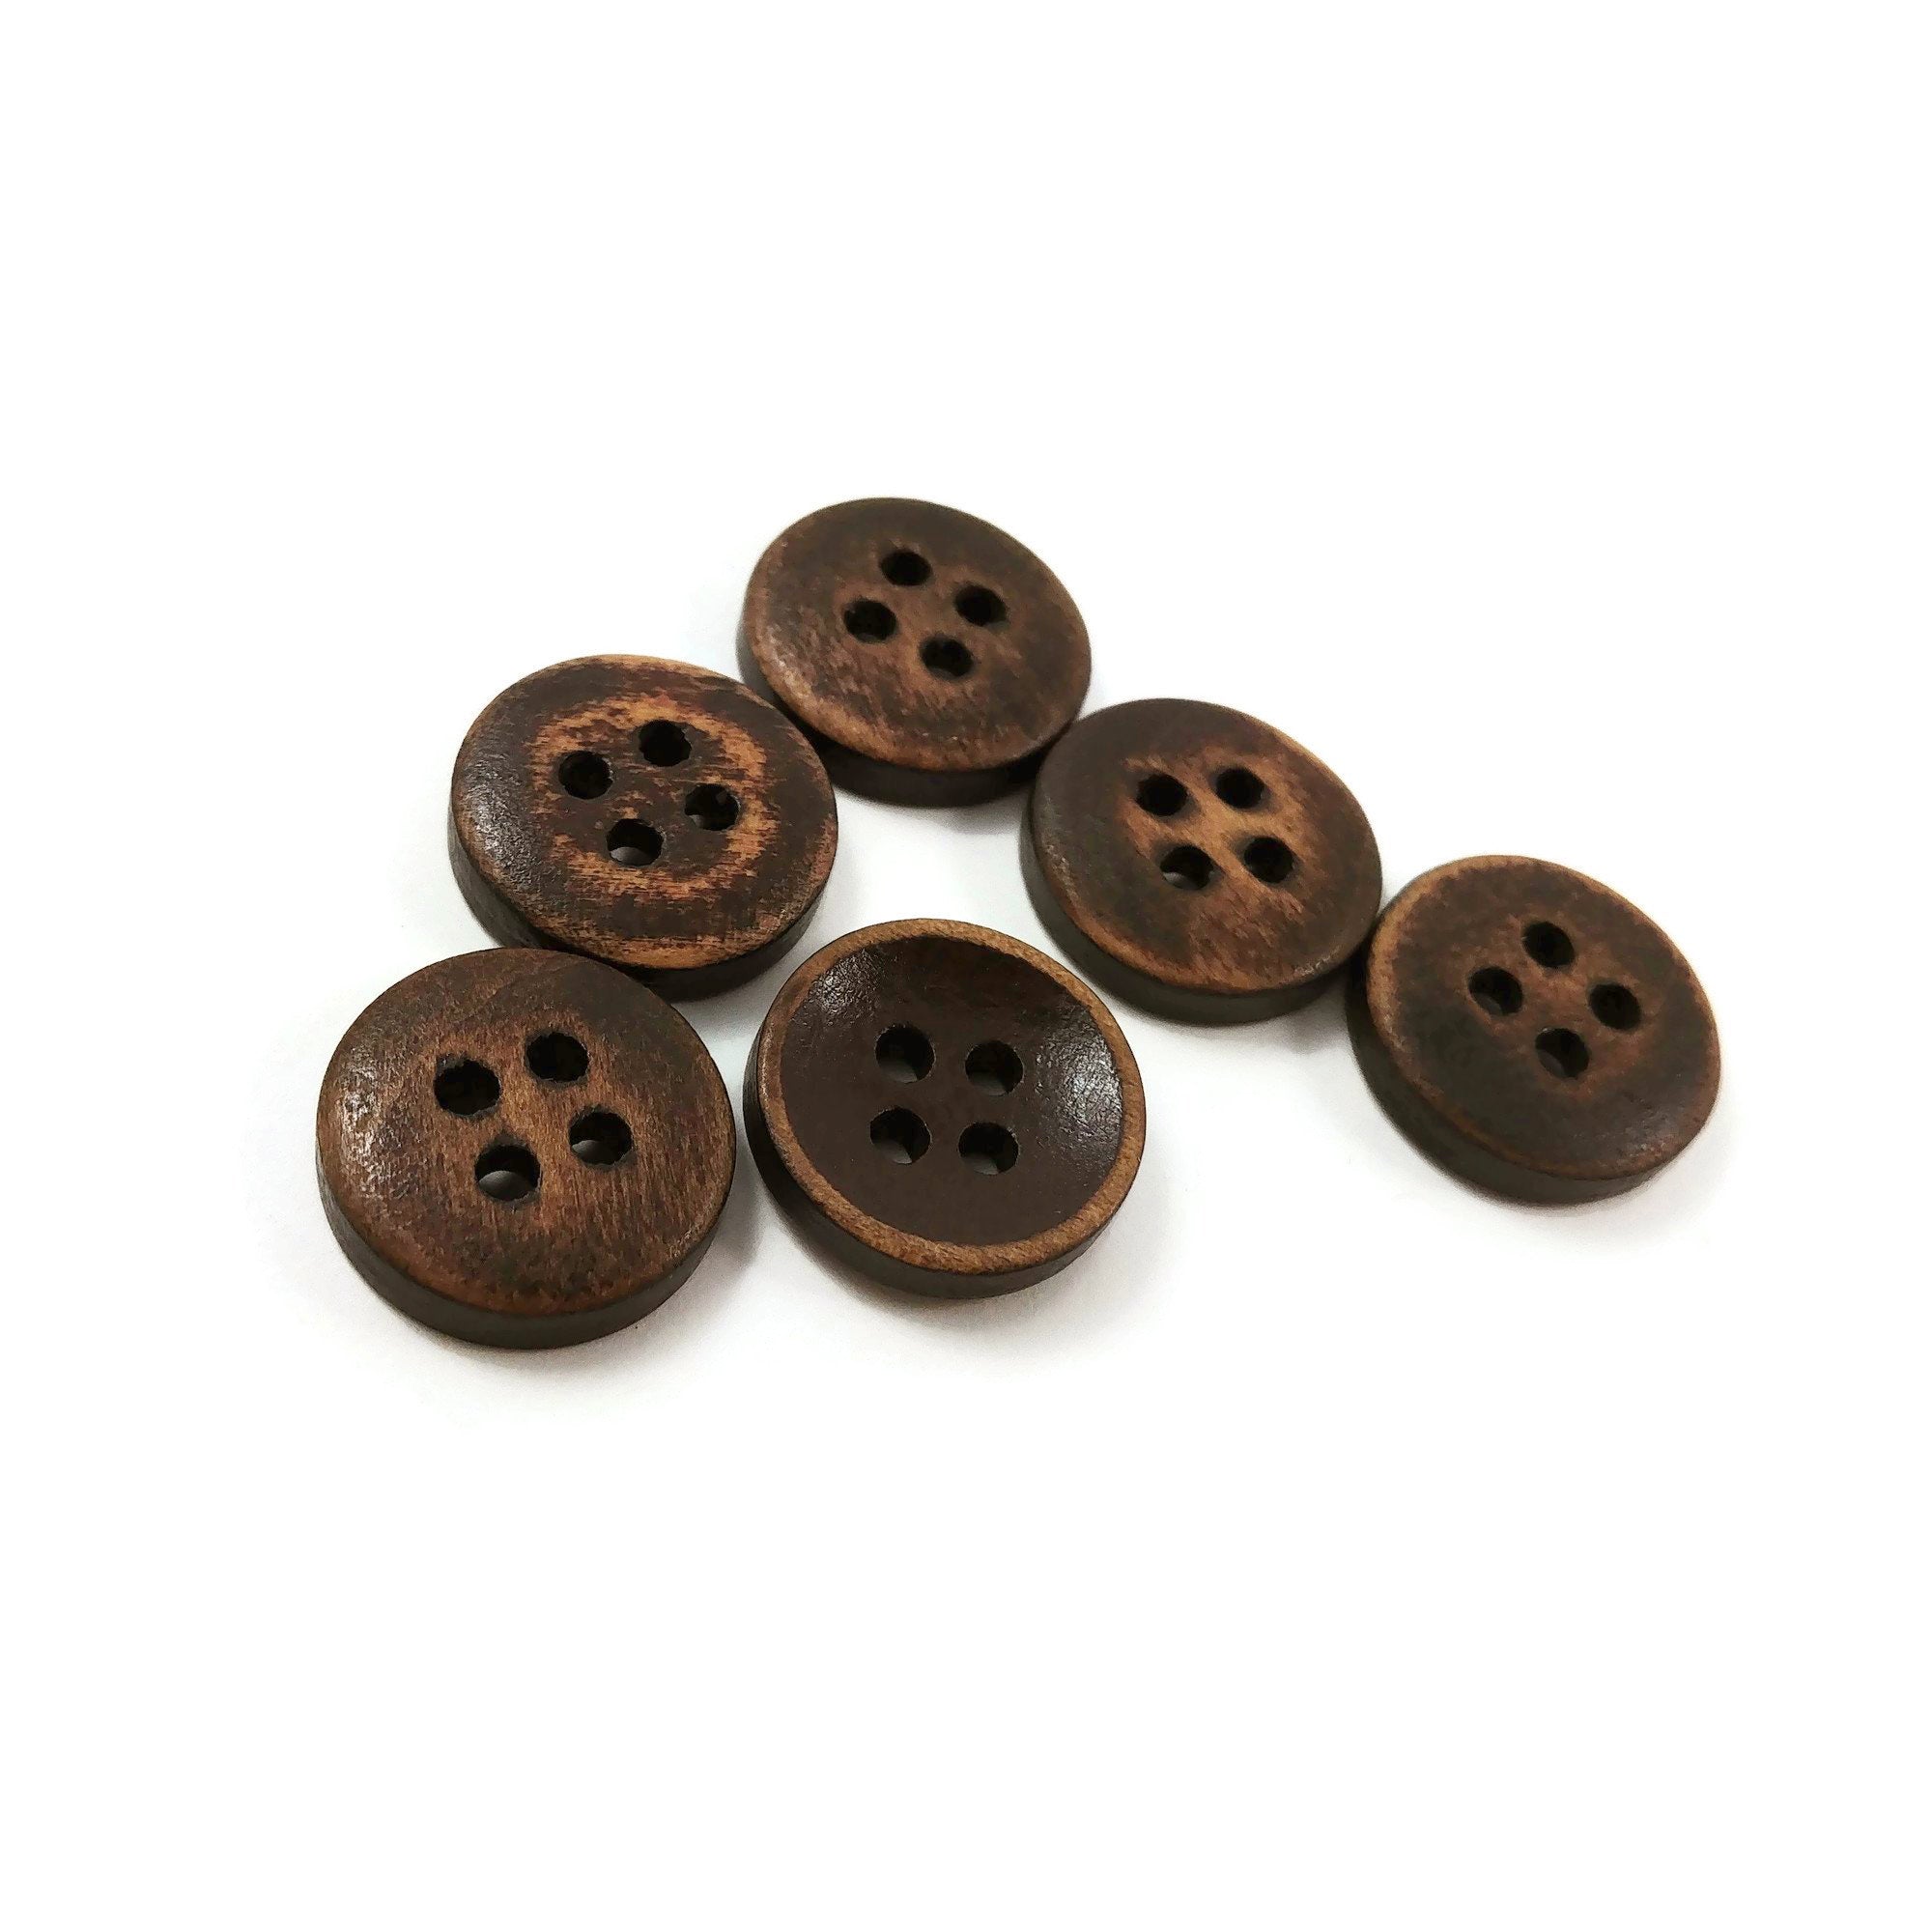 LOT OF 18 Brown Buttons (14mm) - 1812761415